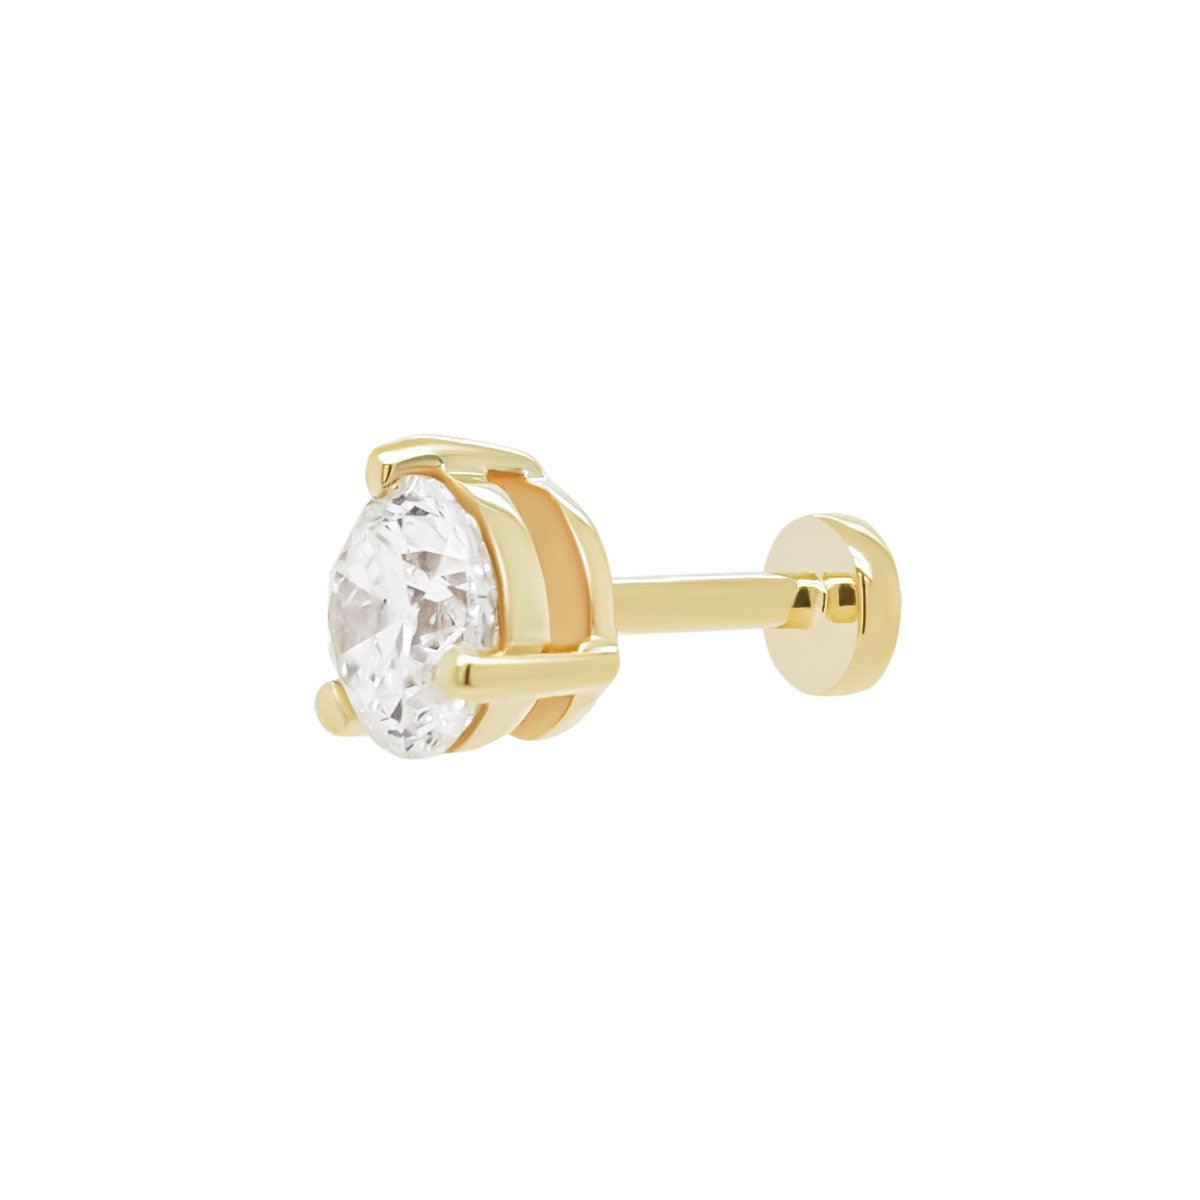 Buy Gold Stainless Steel Six Prong White CZ Solitaire Studs Online - Inox  Jewelry India